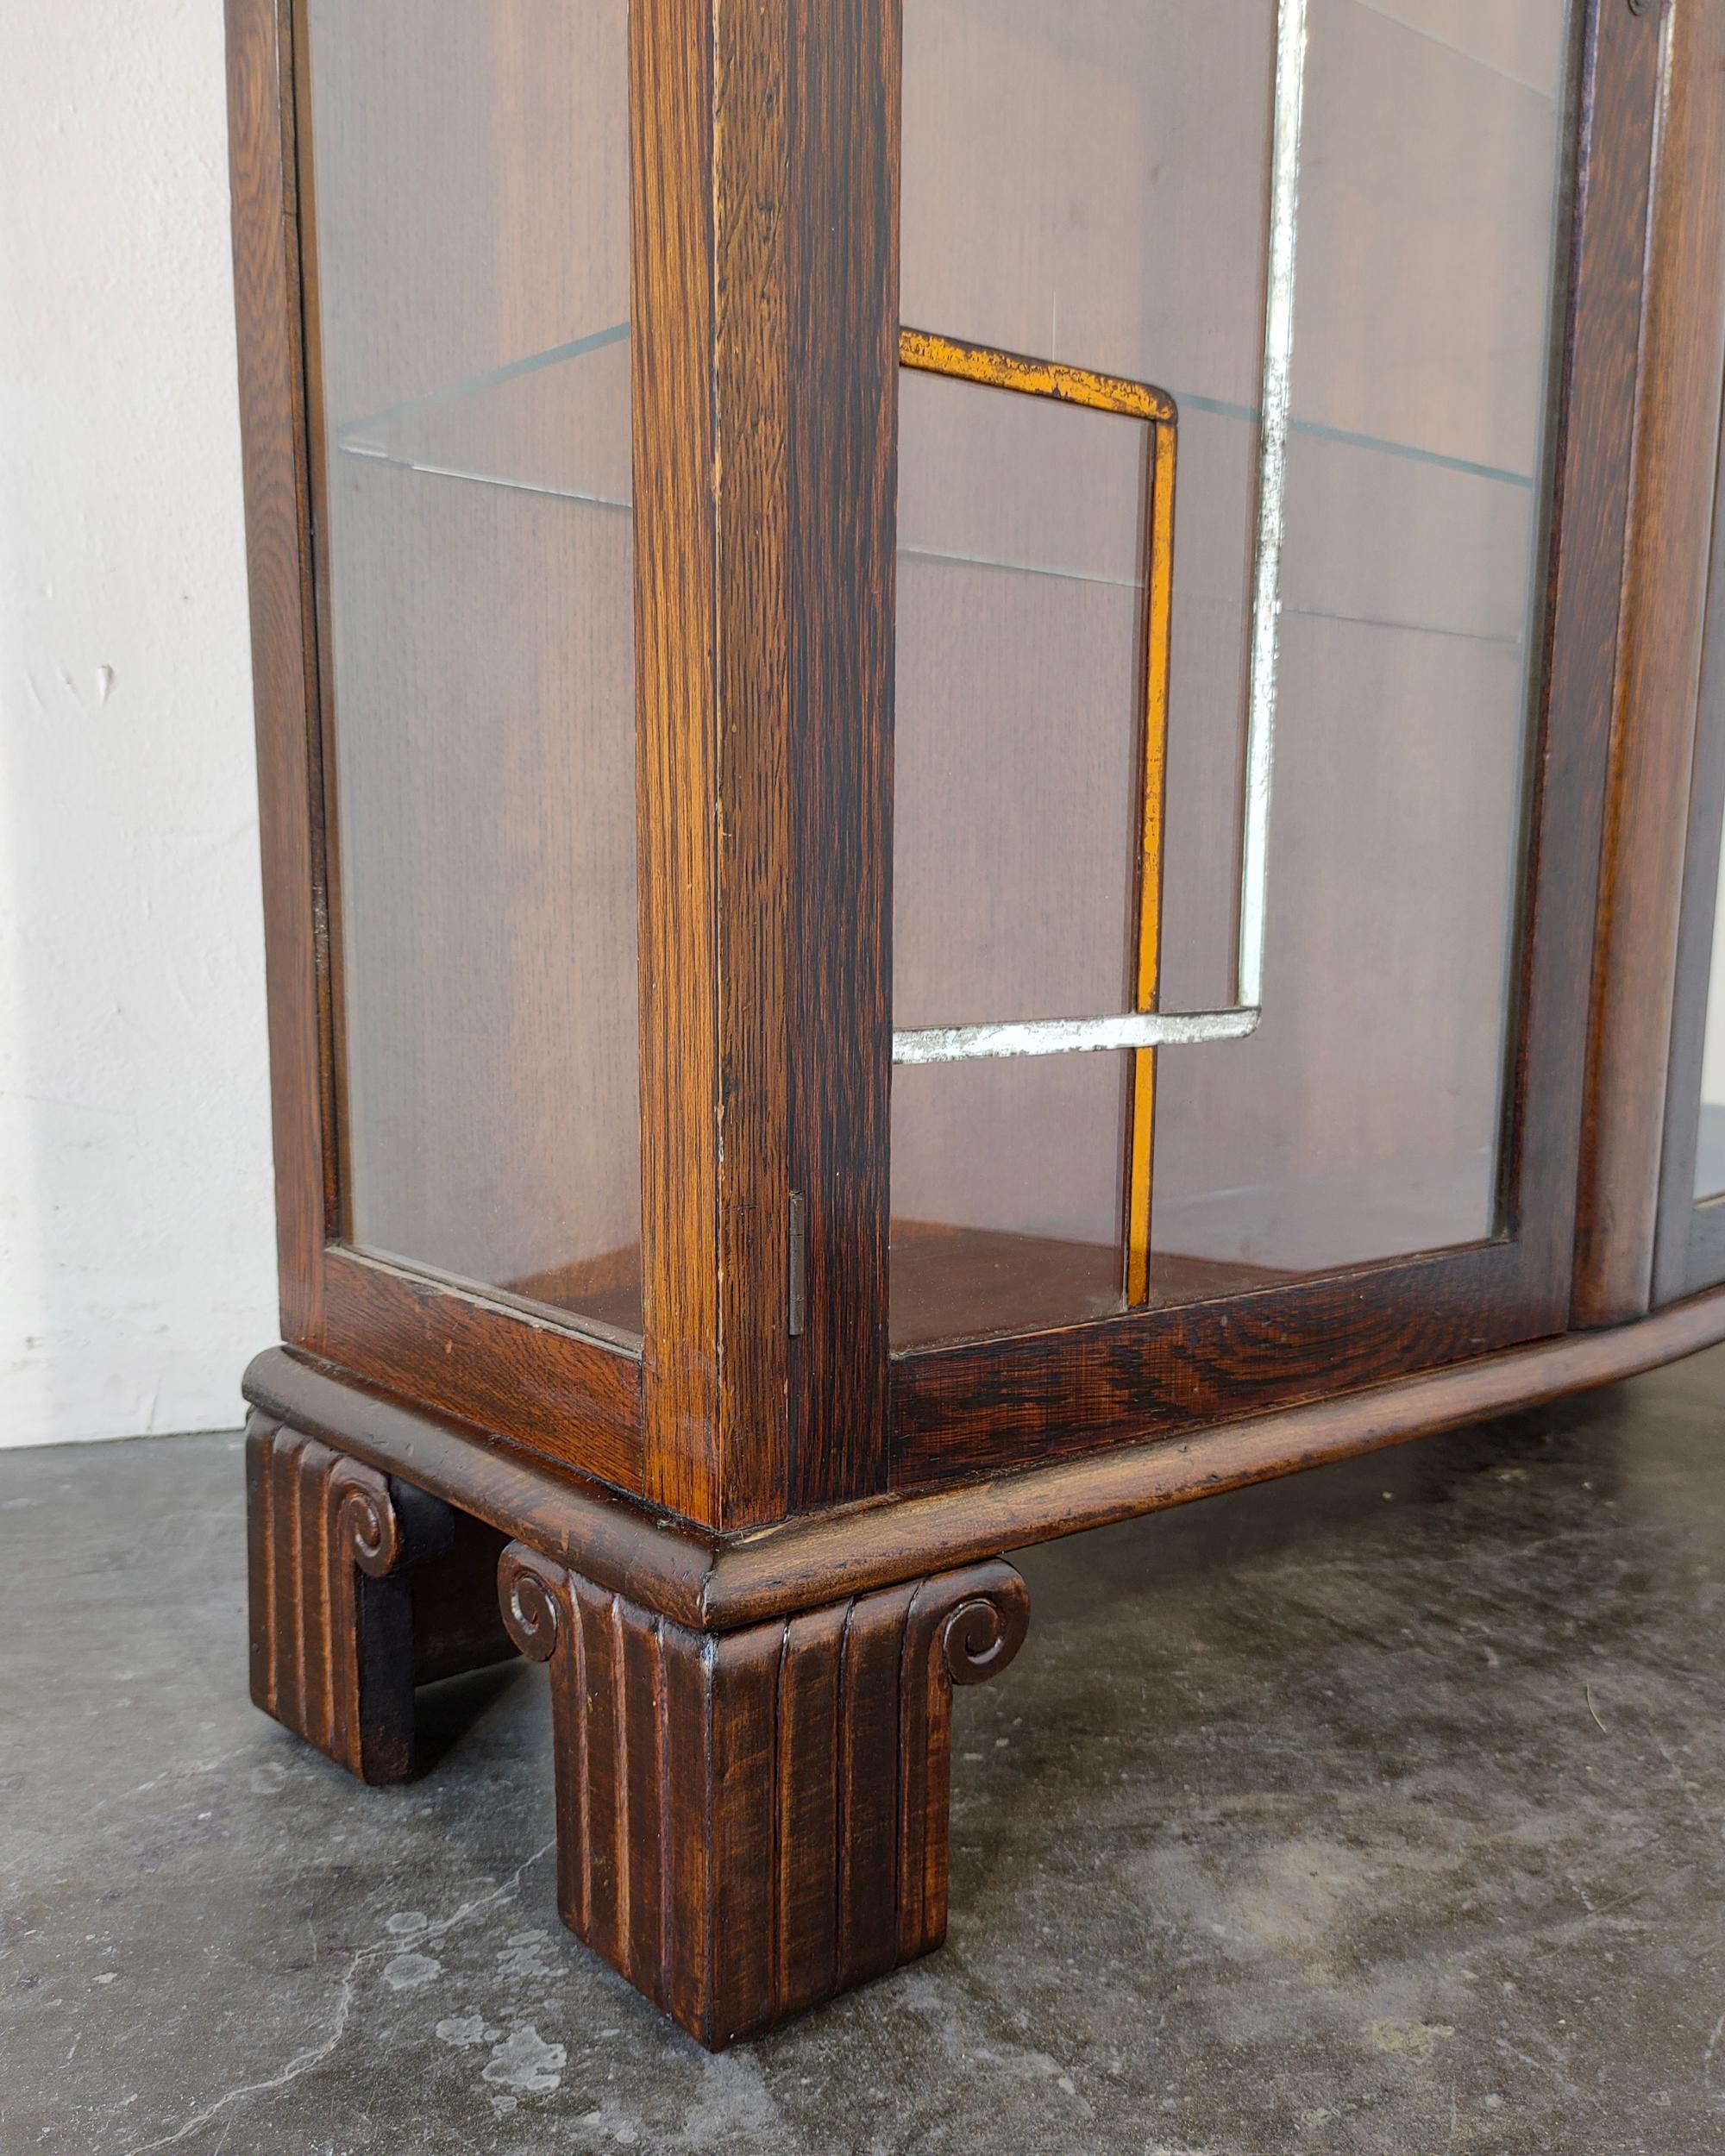 1920s Art Deco Glass Display Cabinet Curio with Decorative Mirror Details 2